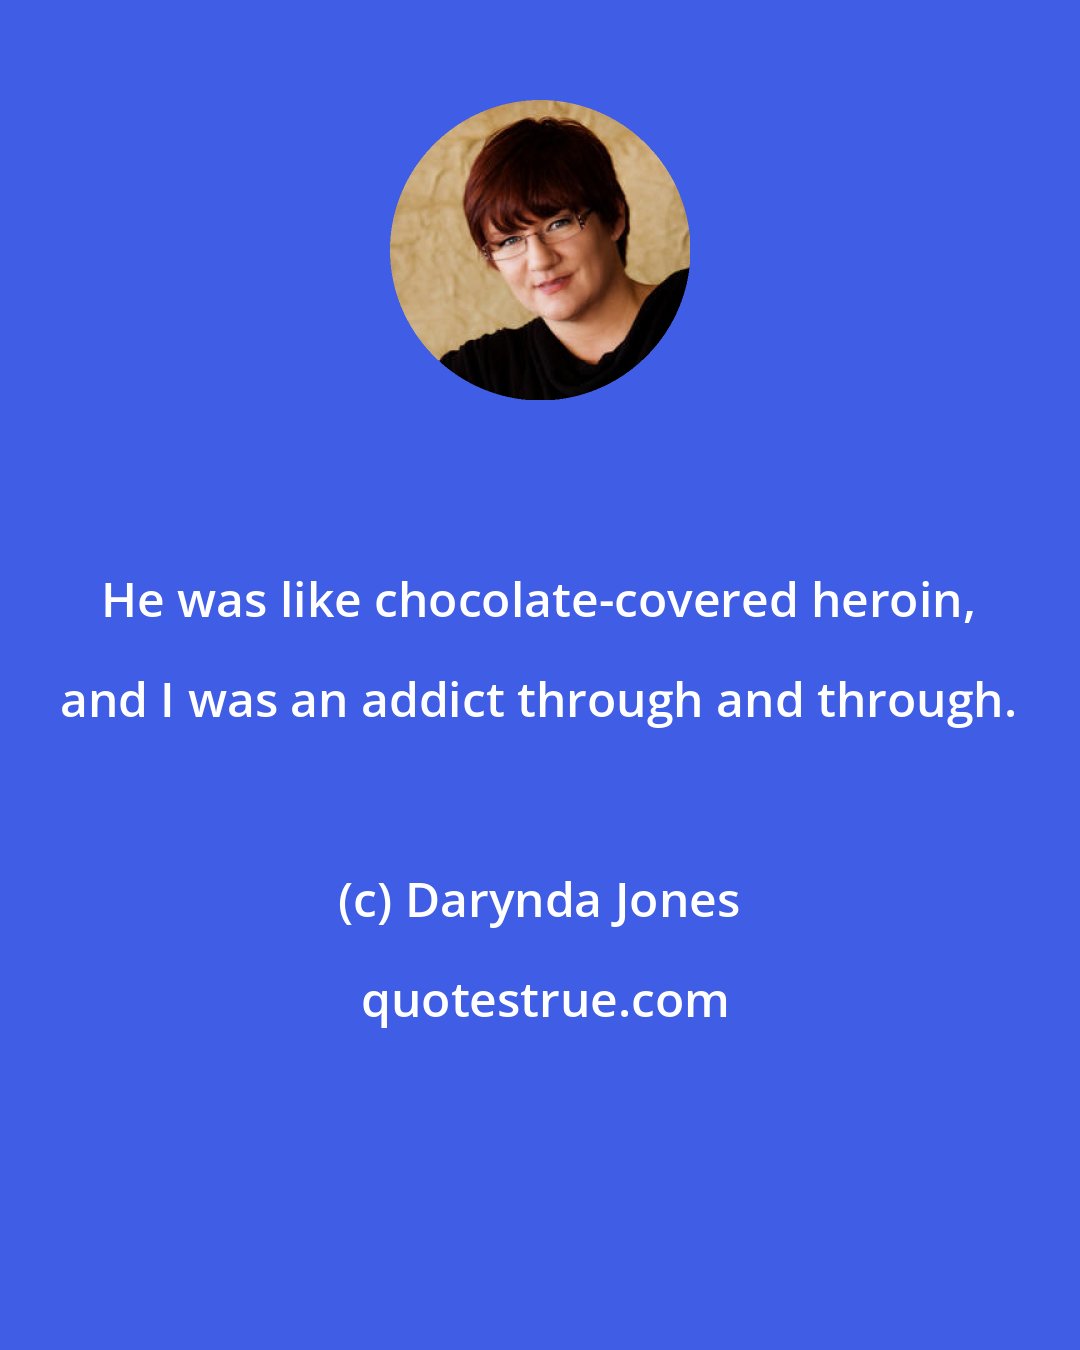 Darynda Jones: He was like chocolate-covered heroin, and I was an addict through and through.